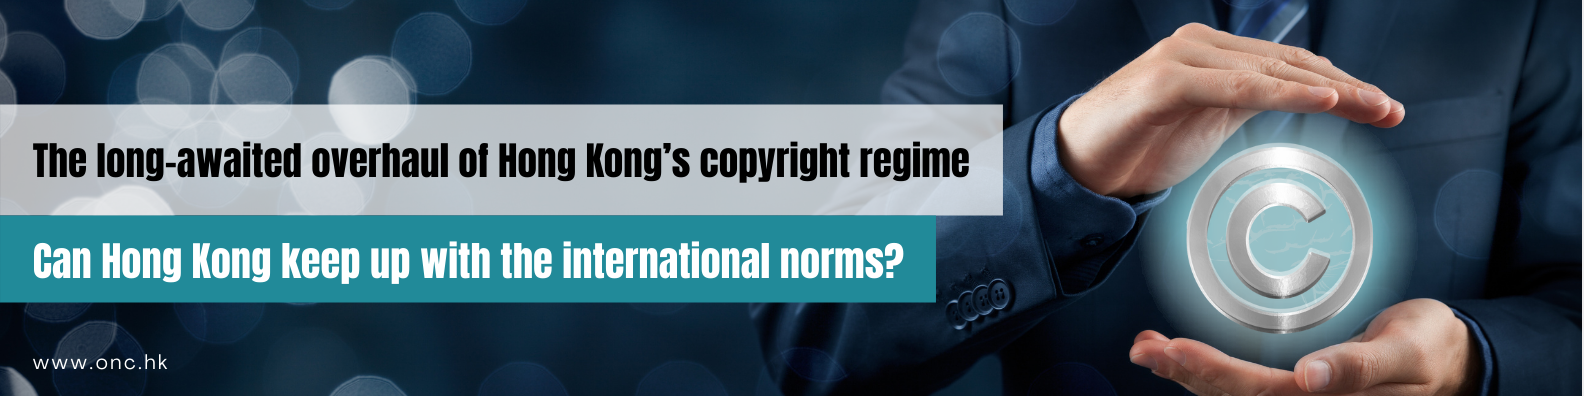 The long-awaited overhaul of Hong Kong’s copyright regime  – Can Hong Kong keep up with the international norms?